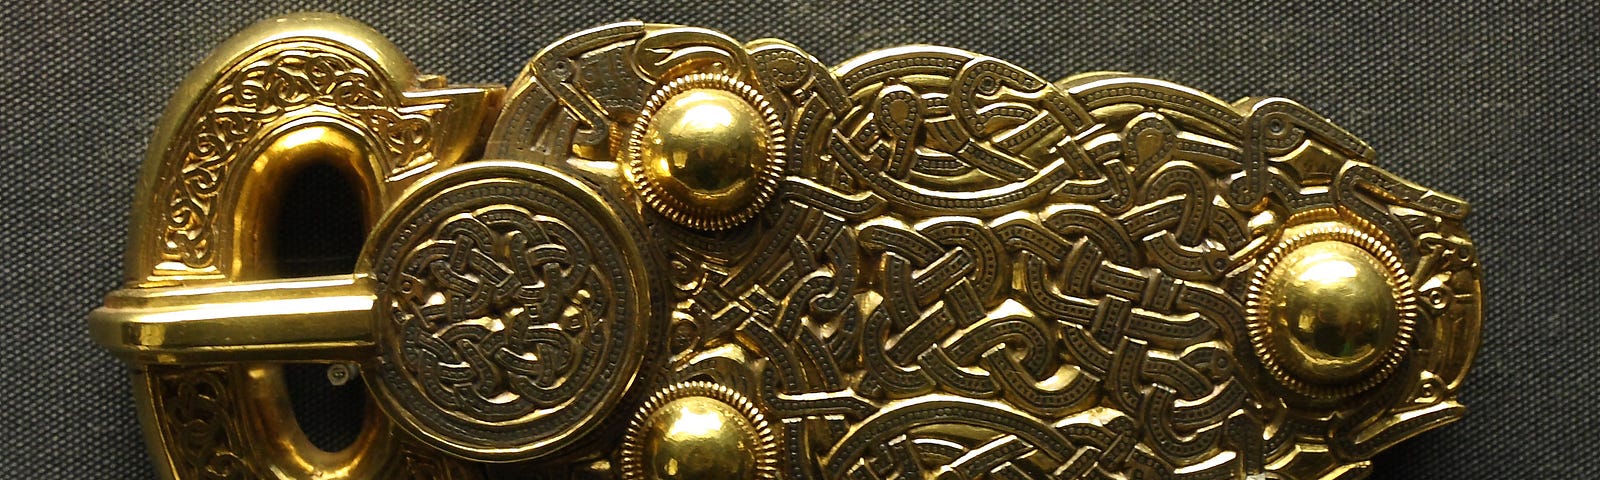 Sutton Hoo: Anglo-Saxon ‘Great Buckle’, gold with intricate woven decoration